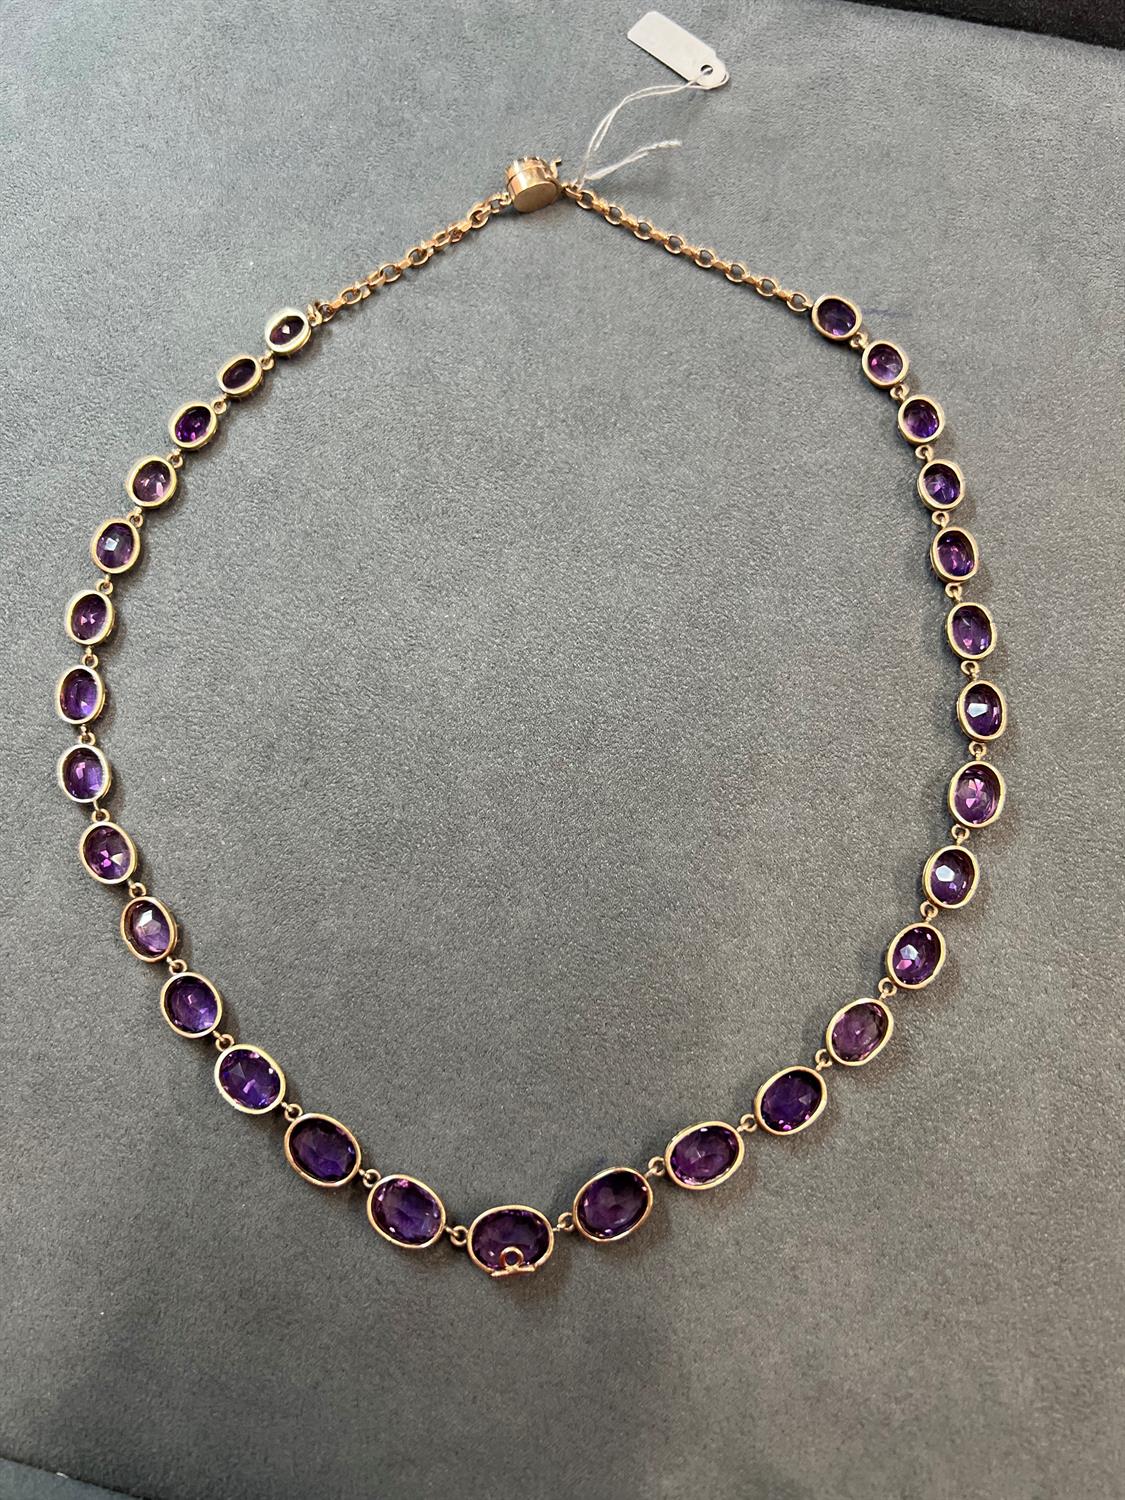 A LATE VICTORIAN AMETHYST RIVIÈRE NECKLACE, CIRCA 1900 The graduated oval-shaped amethysts, - Image 4 of 5